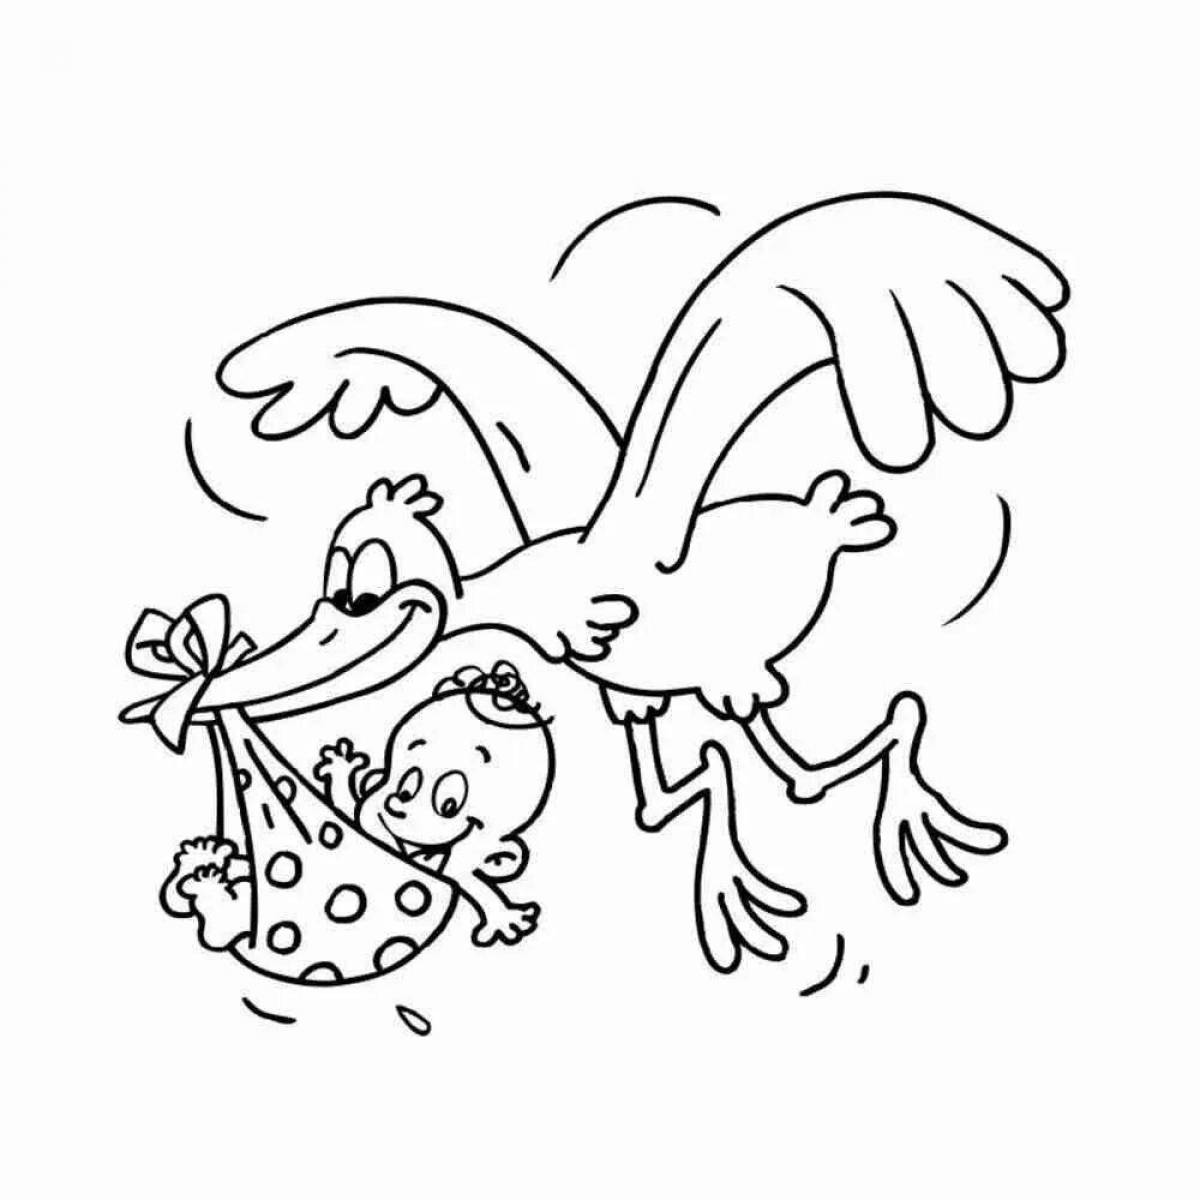 Coloring book of a generous stork with a cub